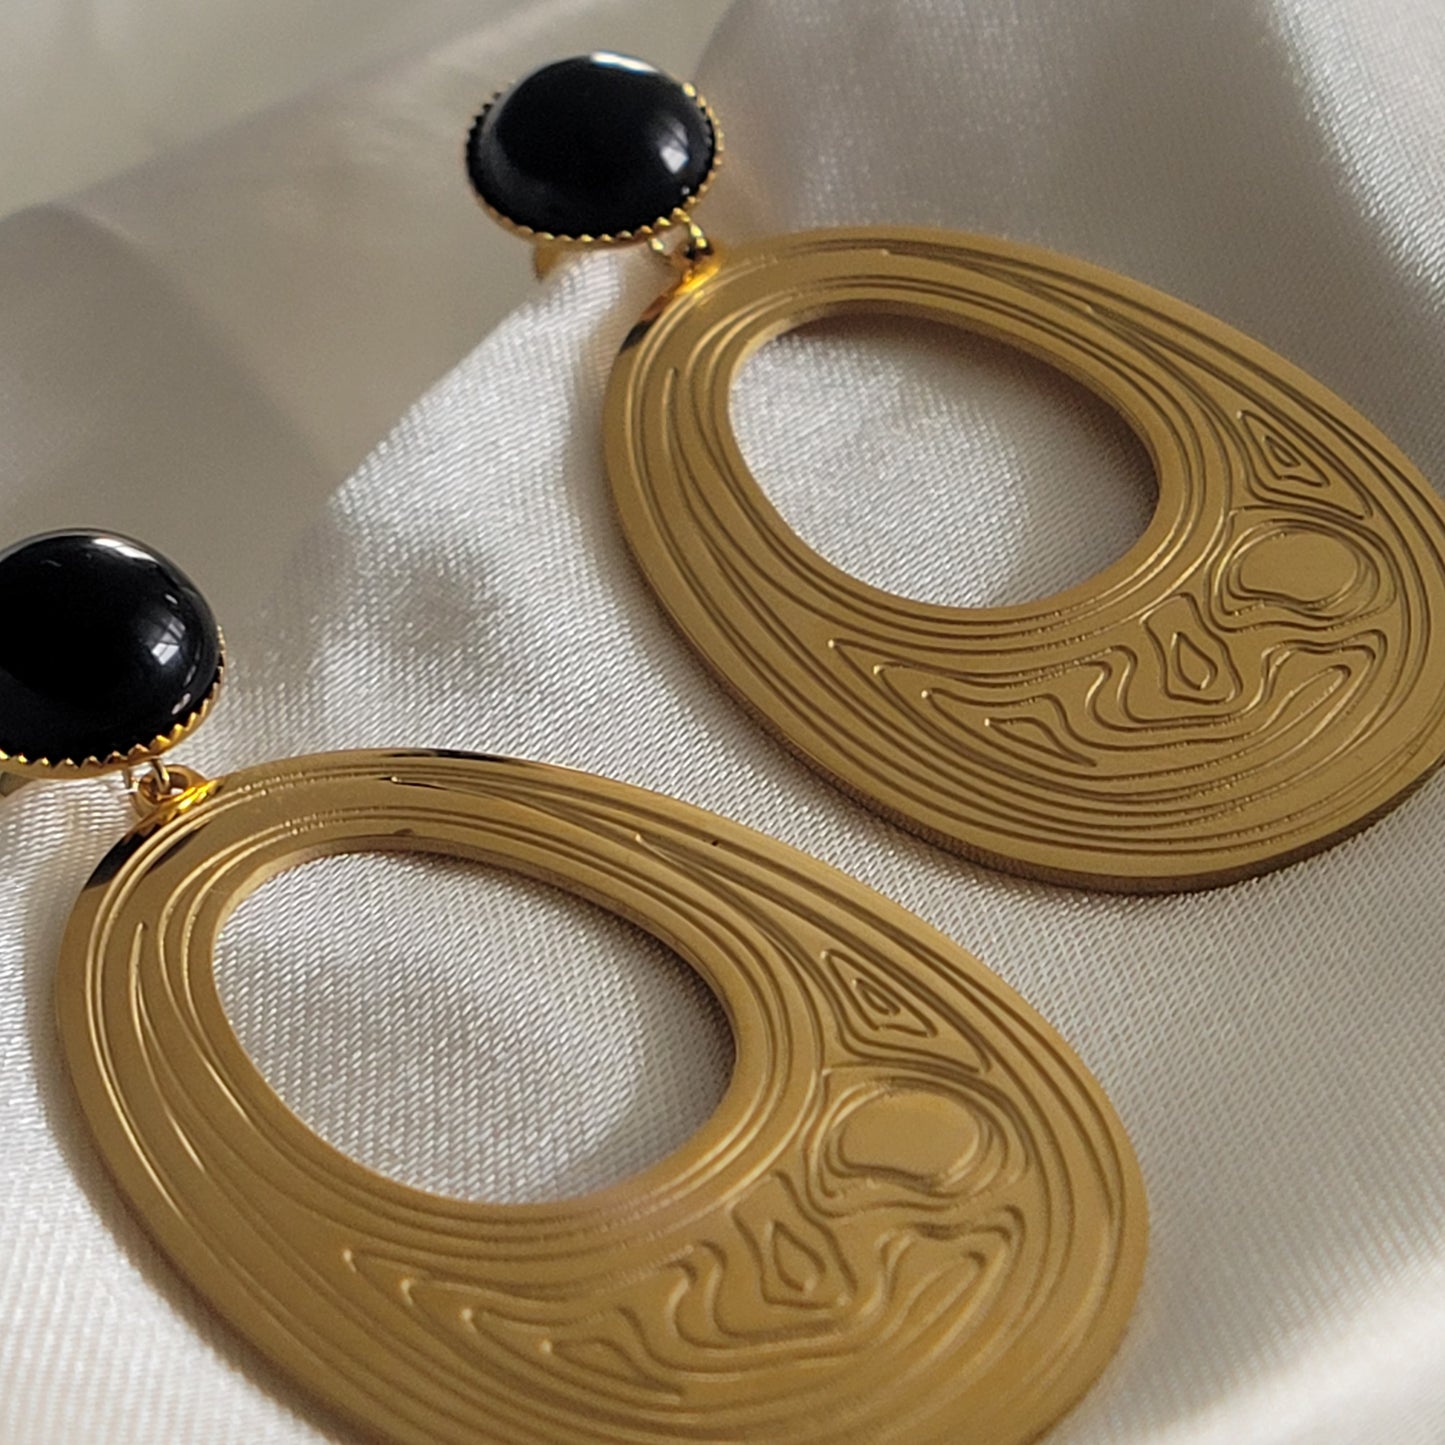 Black and Gold Drop Earring -  Engraved / Natural Black Stone